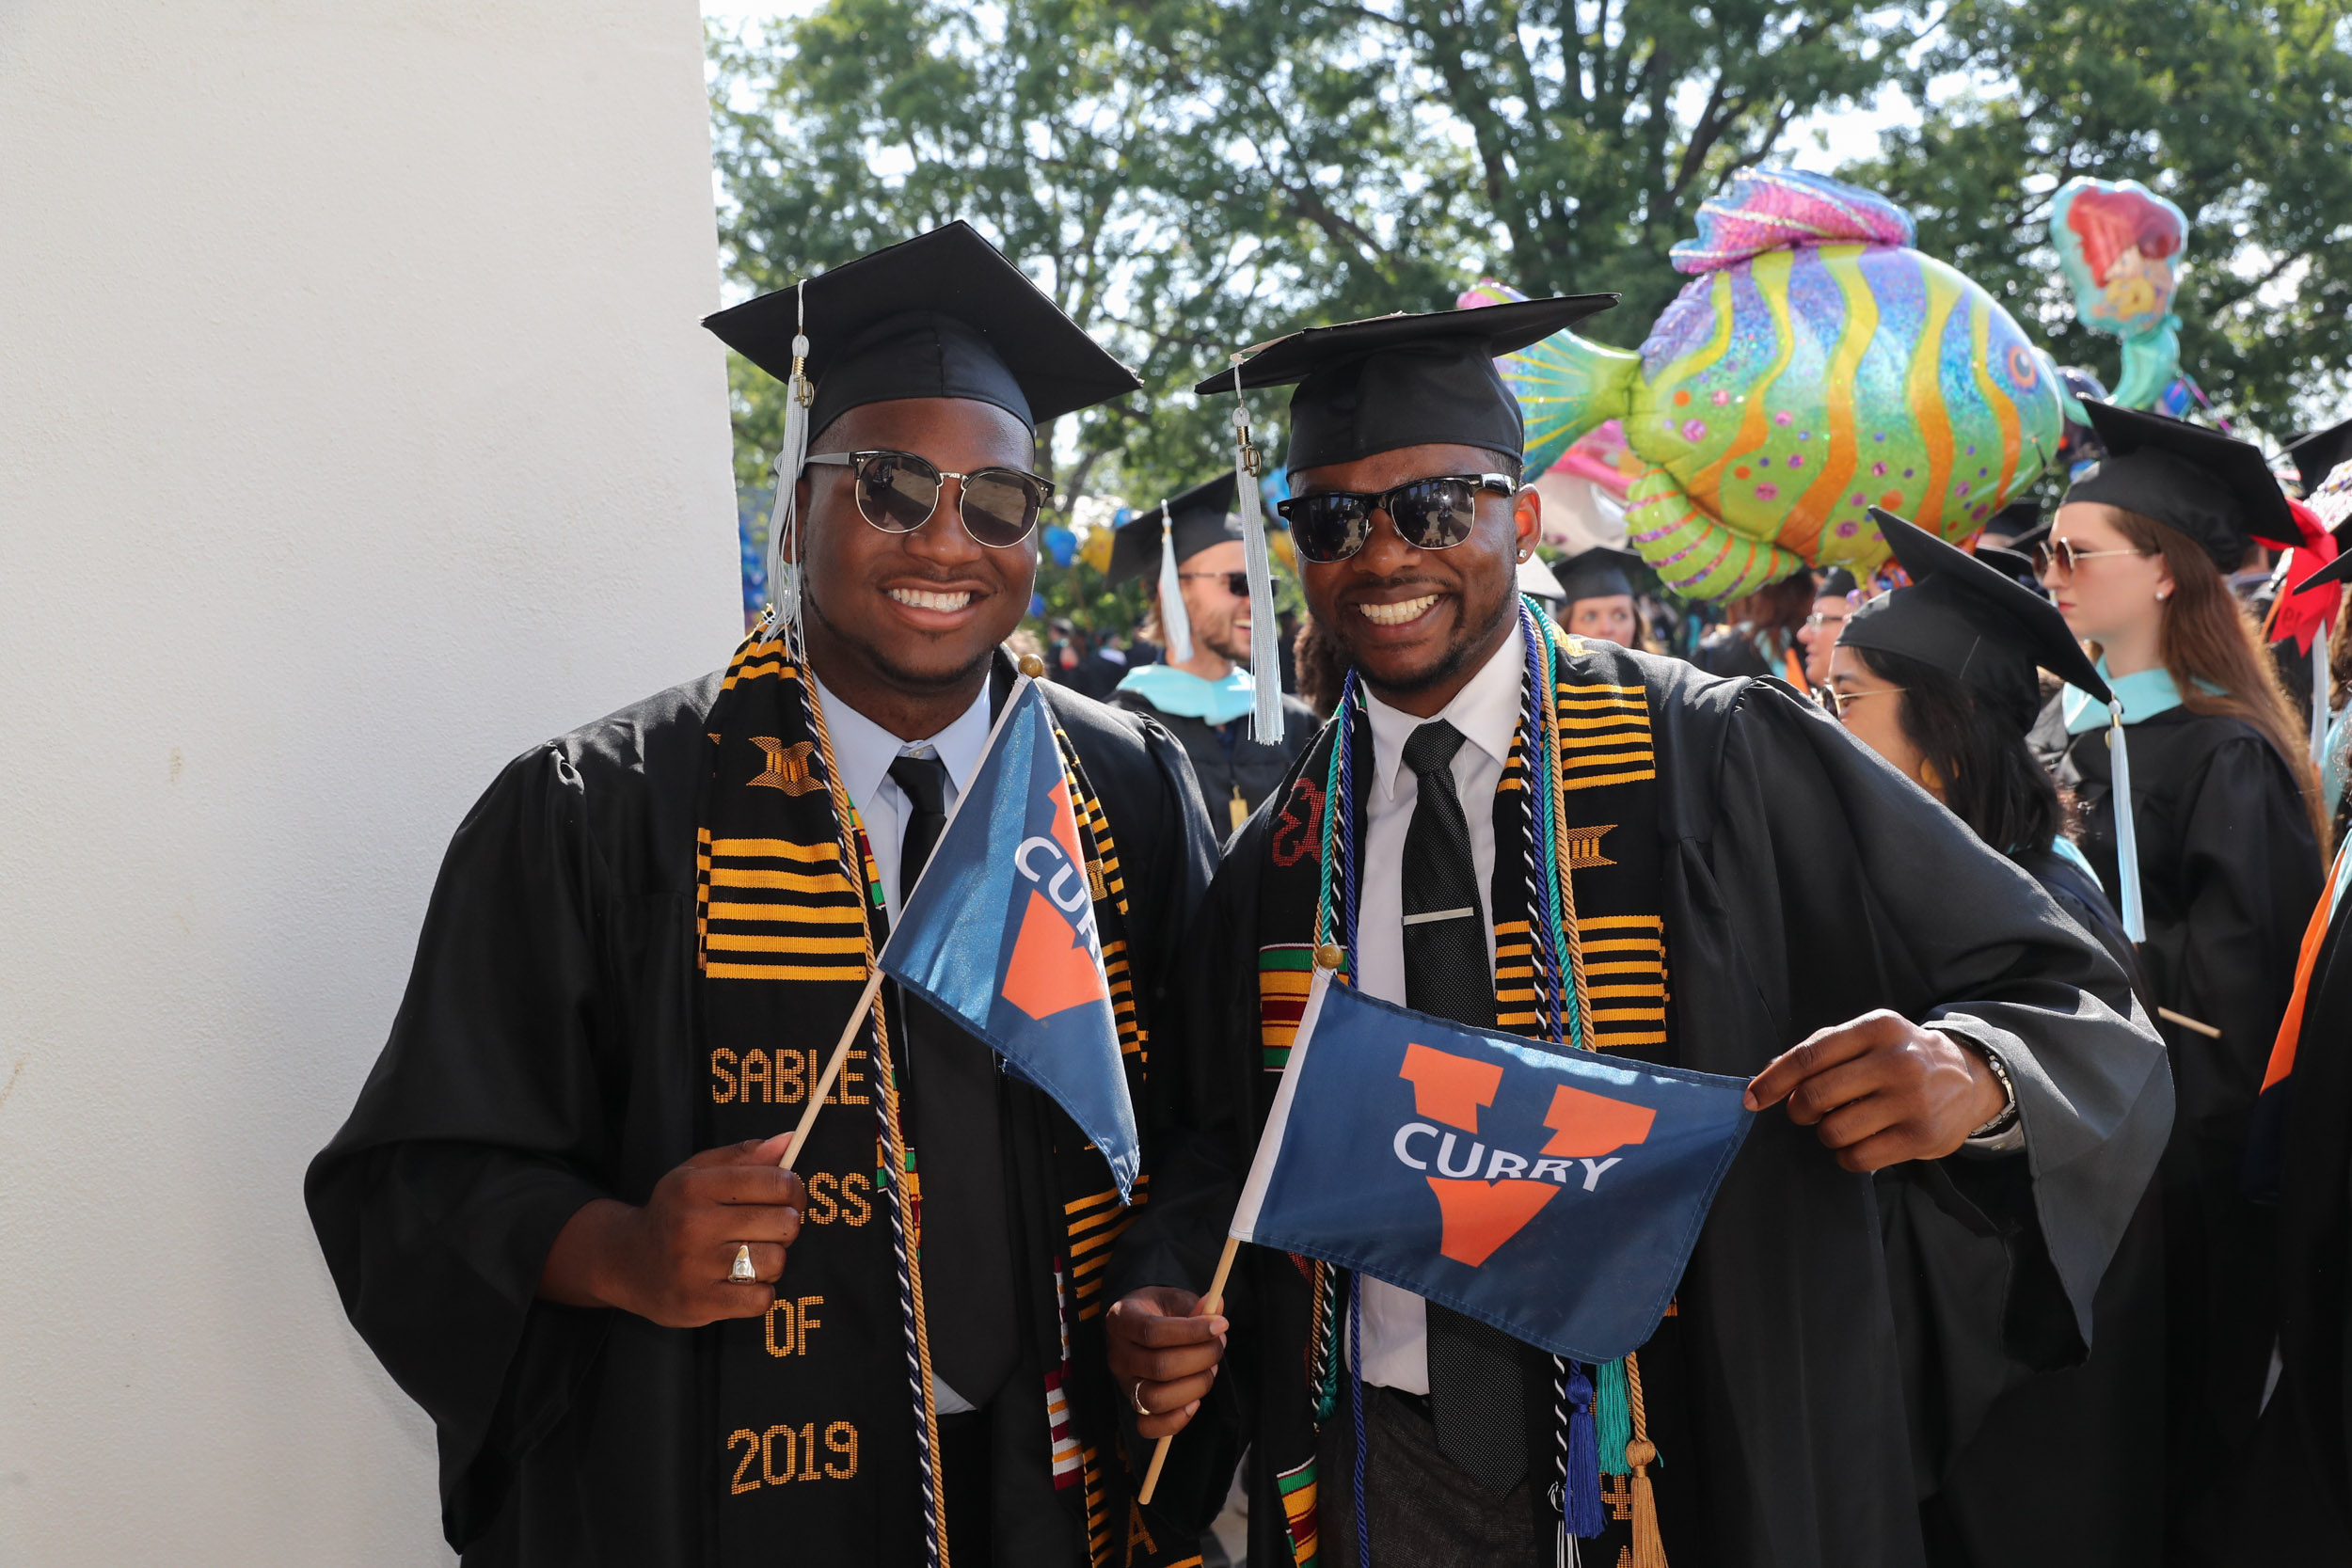 Graduates holding Curry flags smiling at the camera